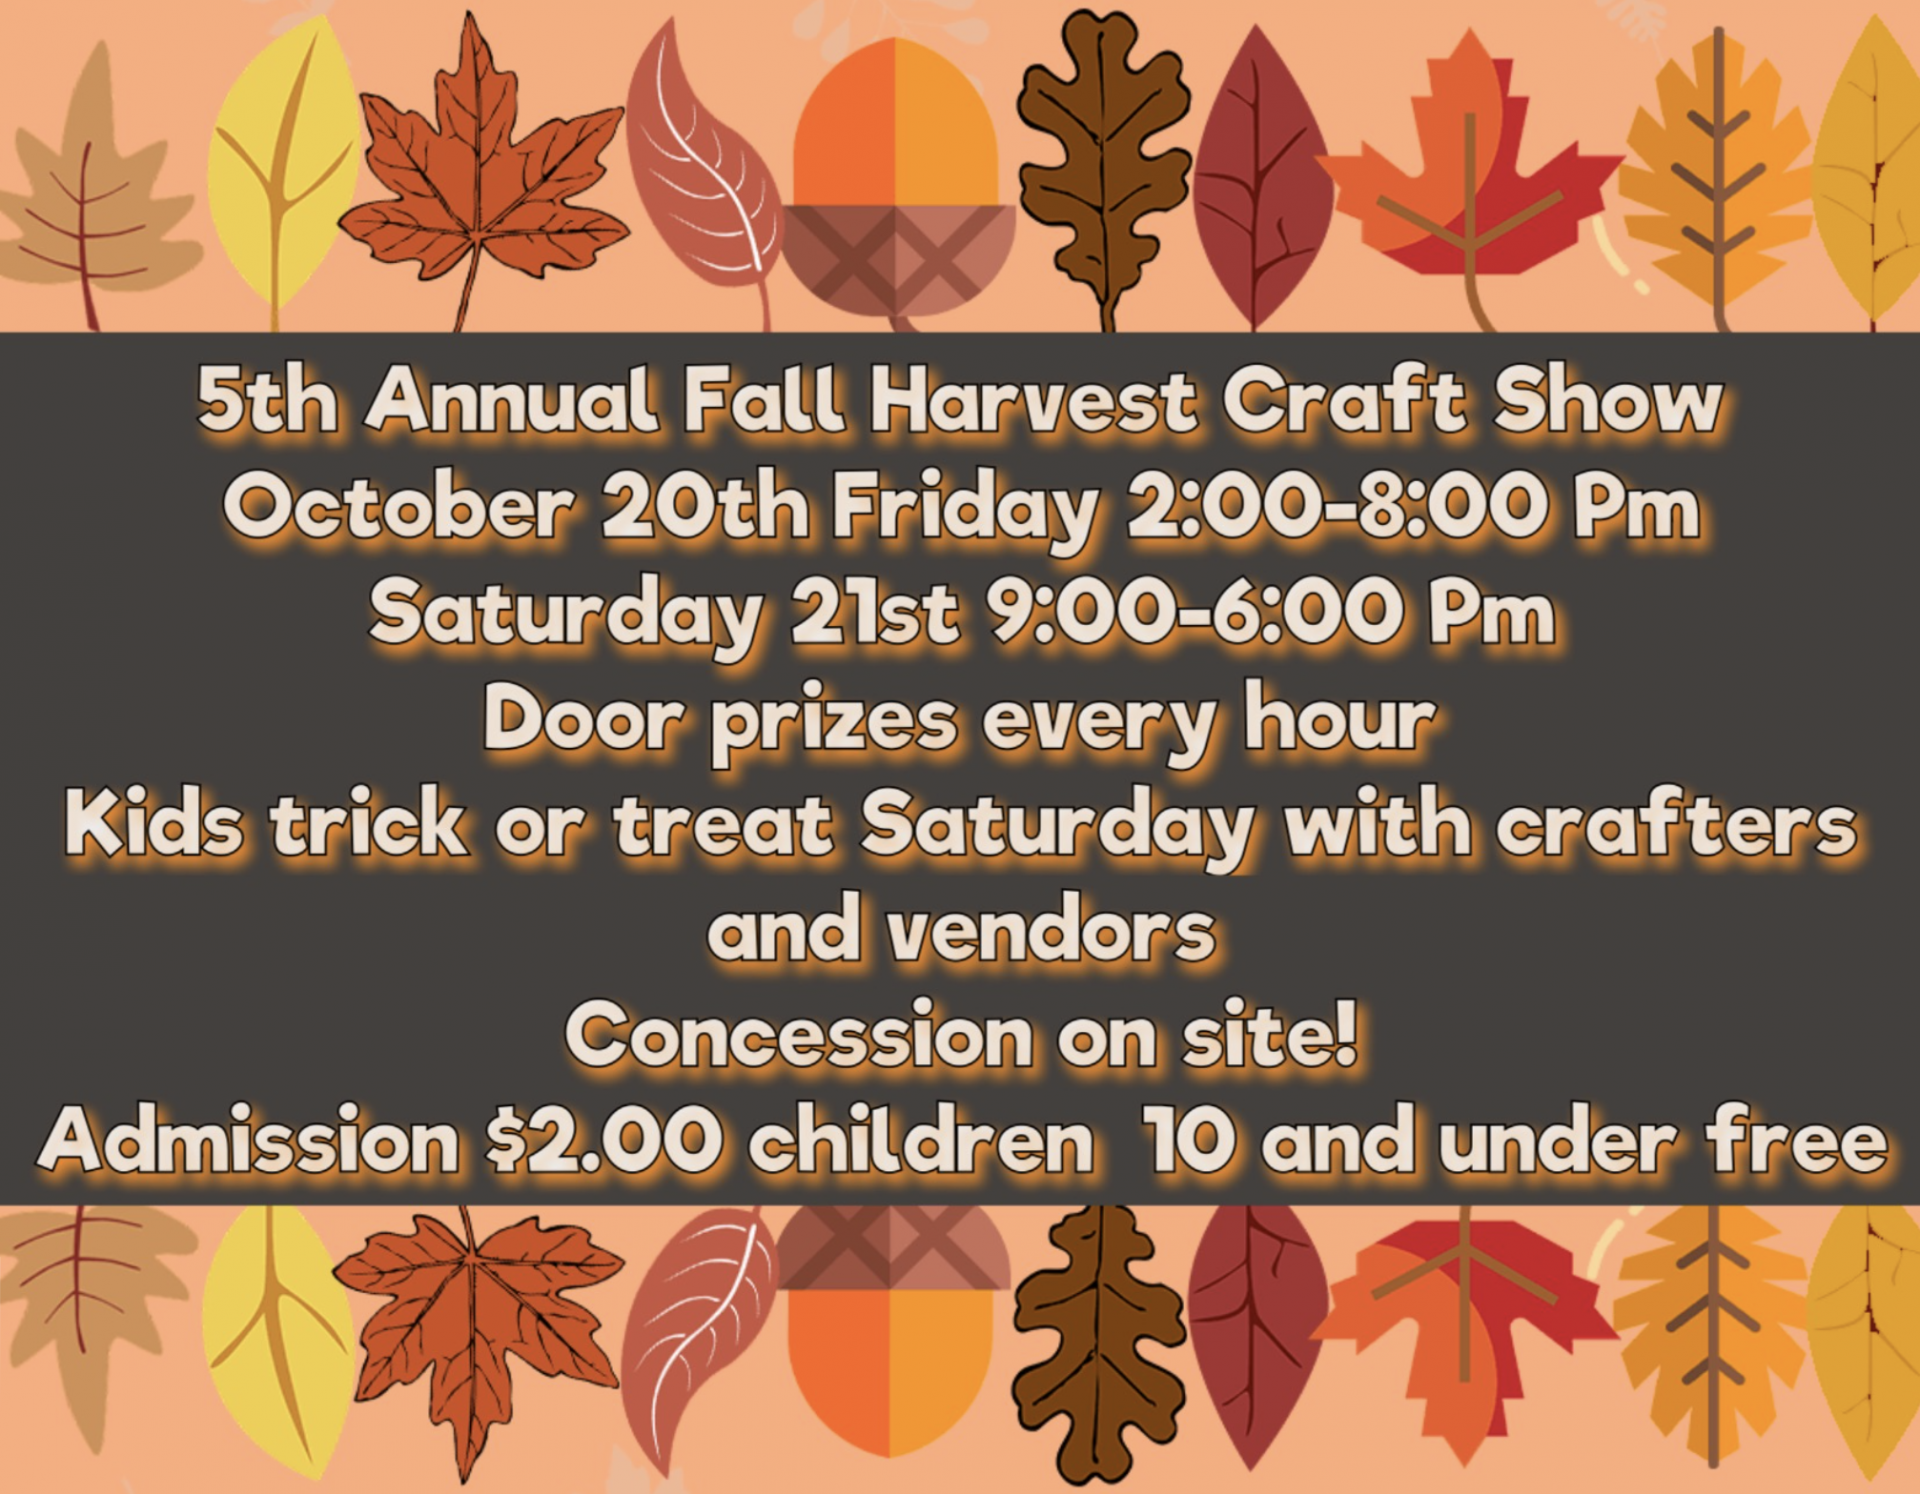 5th Annual Fall Harvest Craft Show